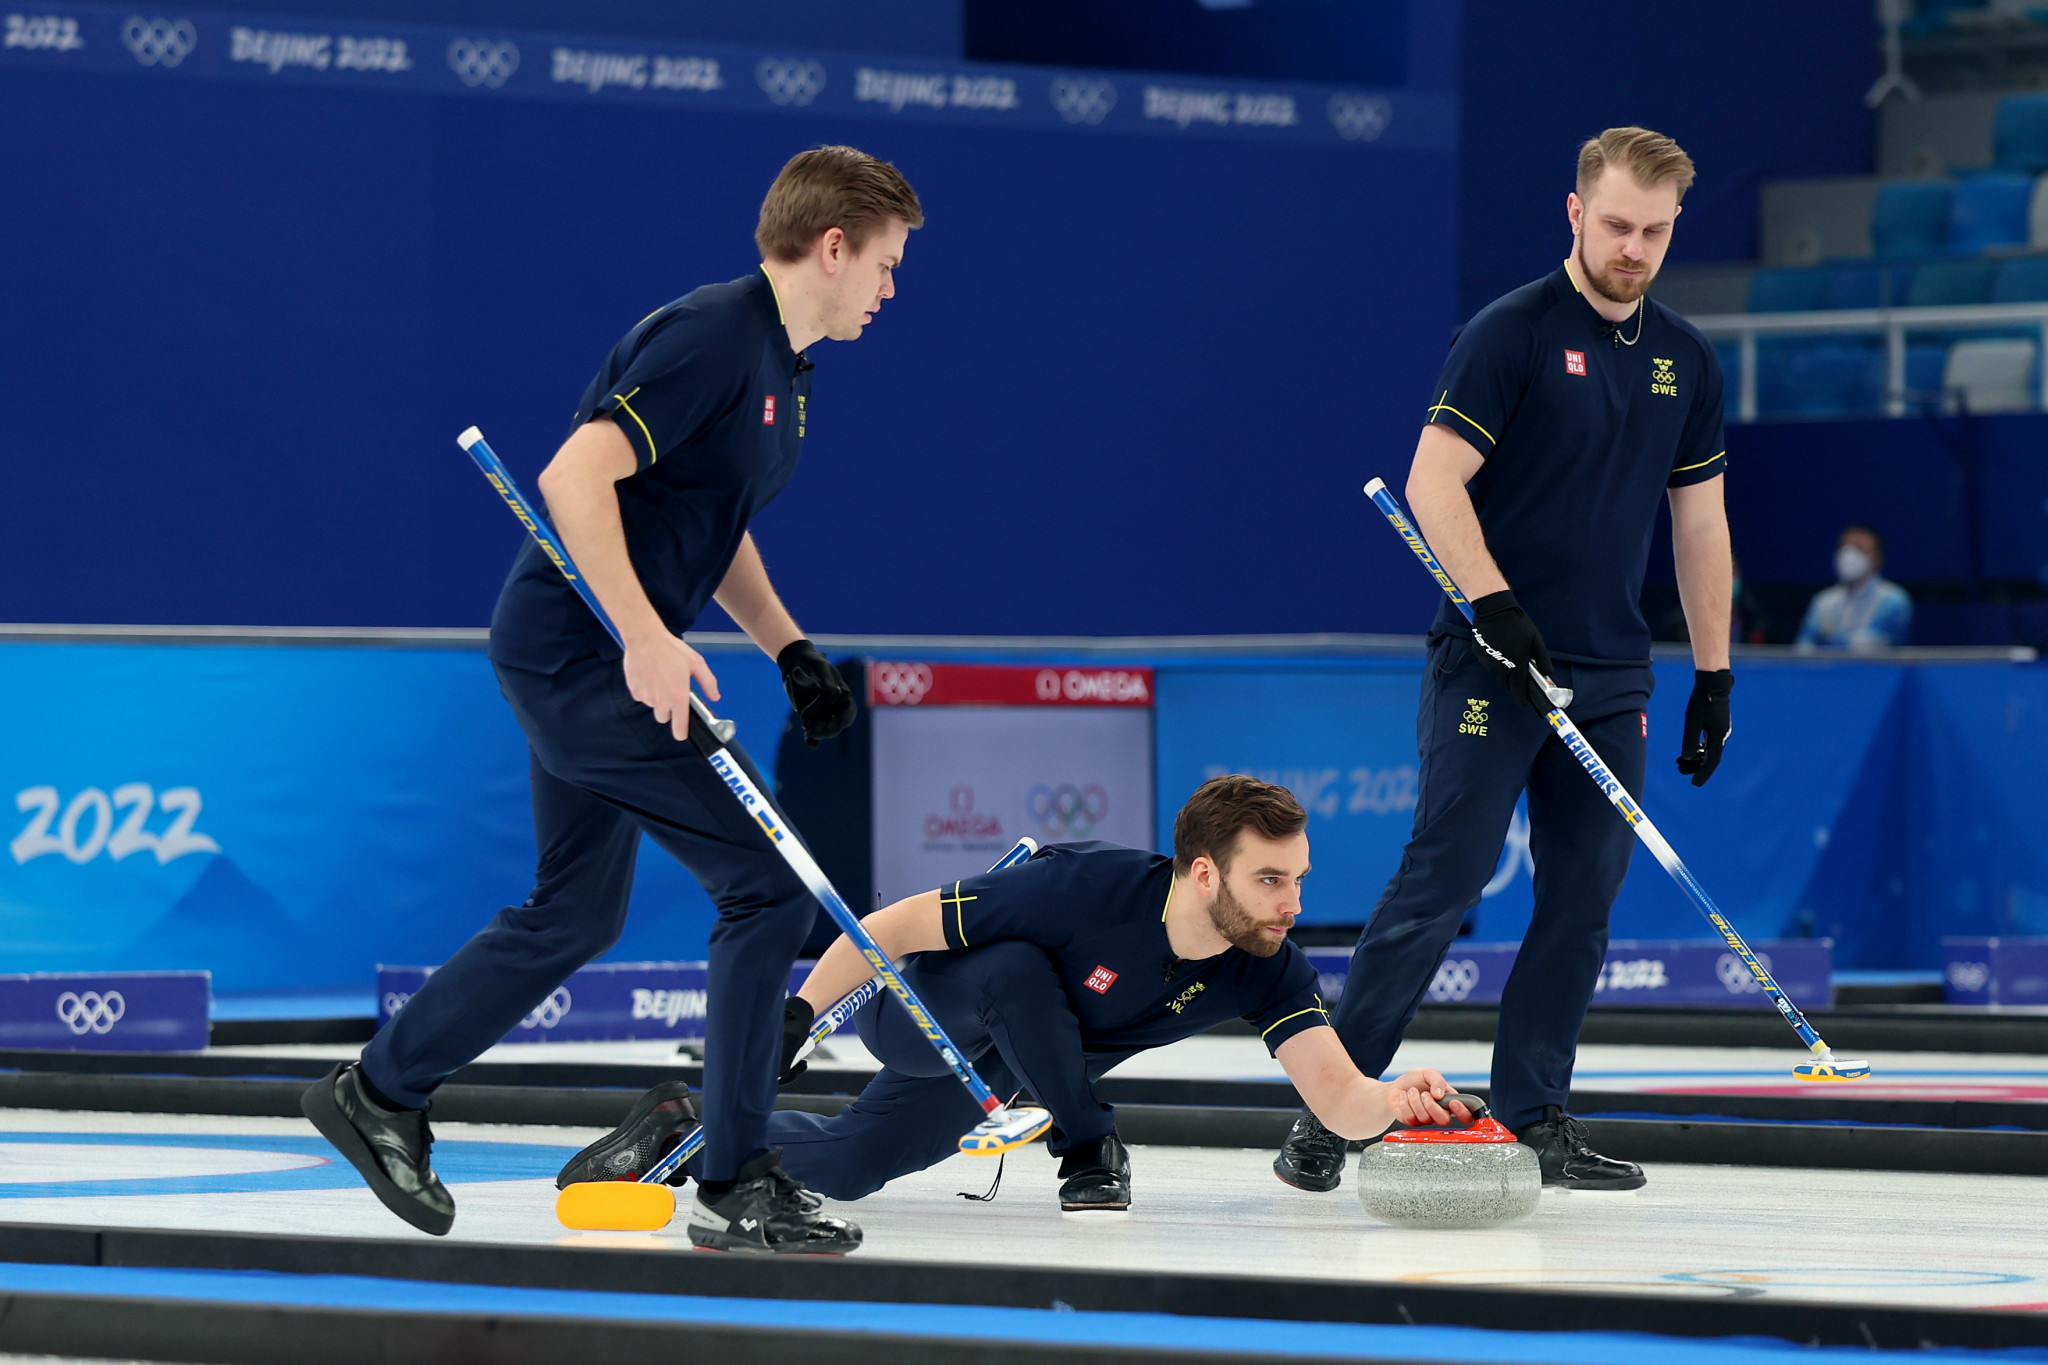 Olympic champions Sweden seek further success at World Men's Curling Championship